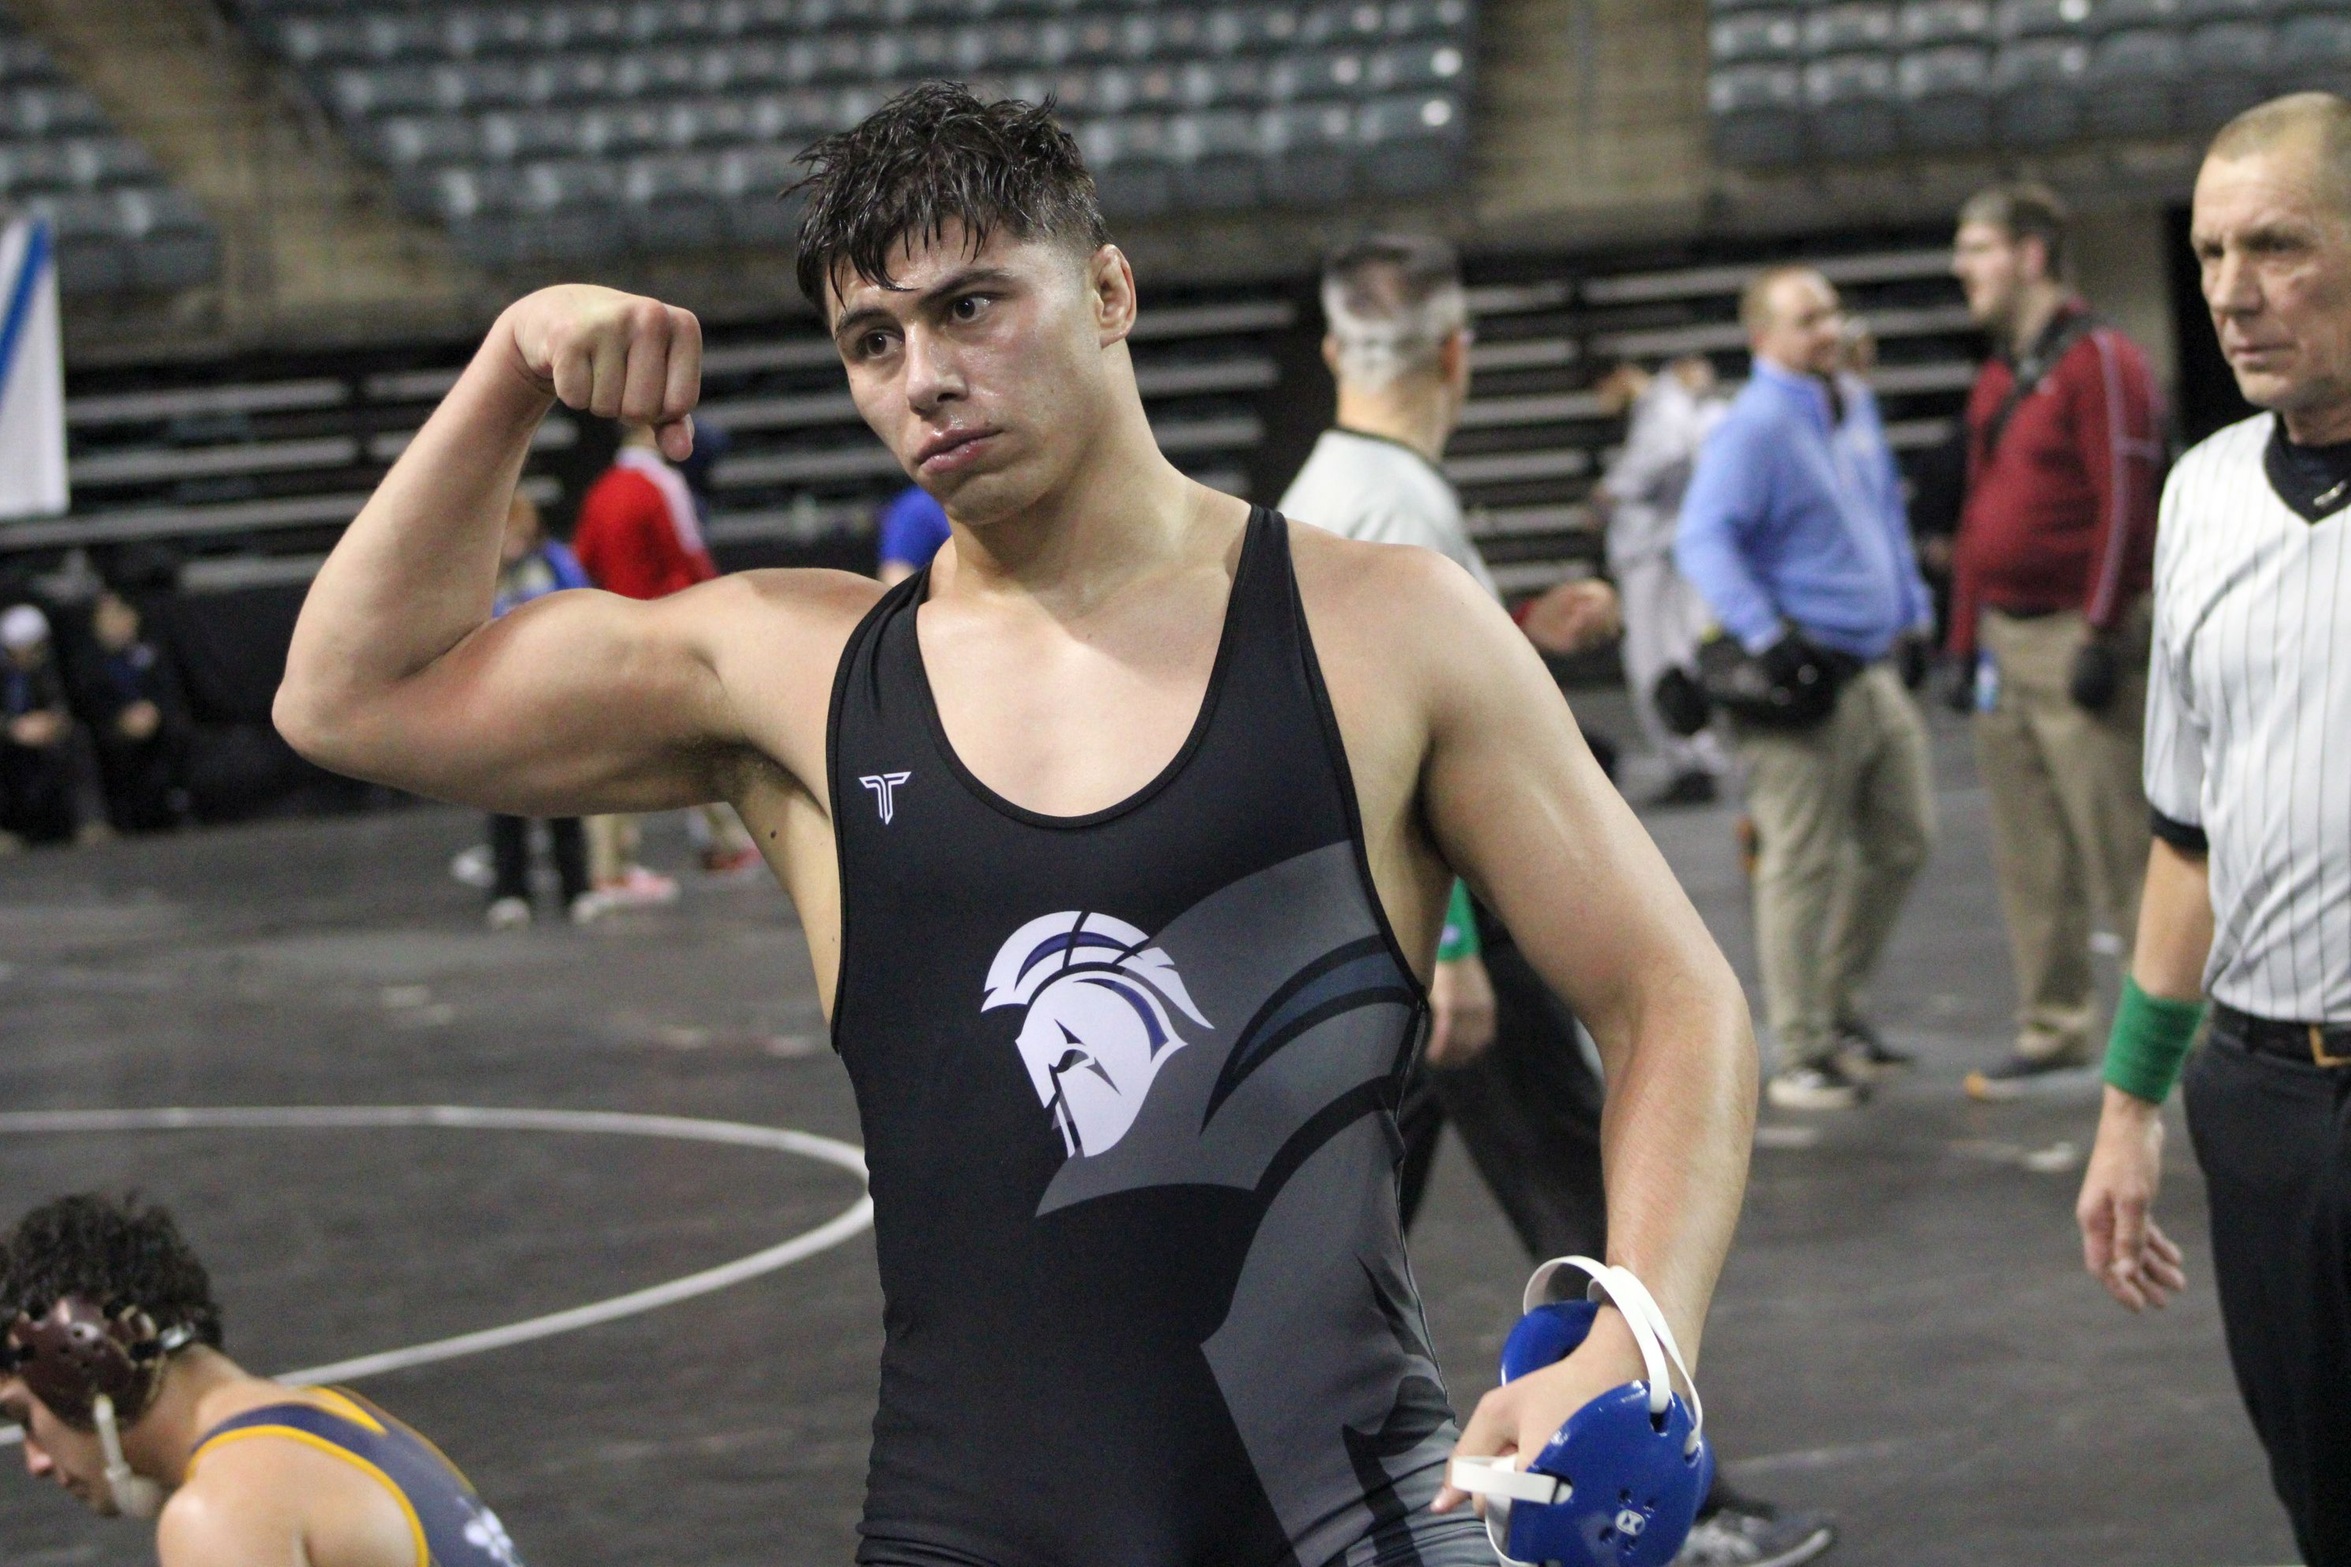 NIACC's Ein Carlos flexes after his 184-pound quarterfinal round win Friday night at the NJCAA national wrestling tournament in Council Bluffs.